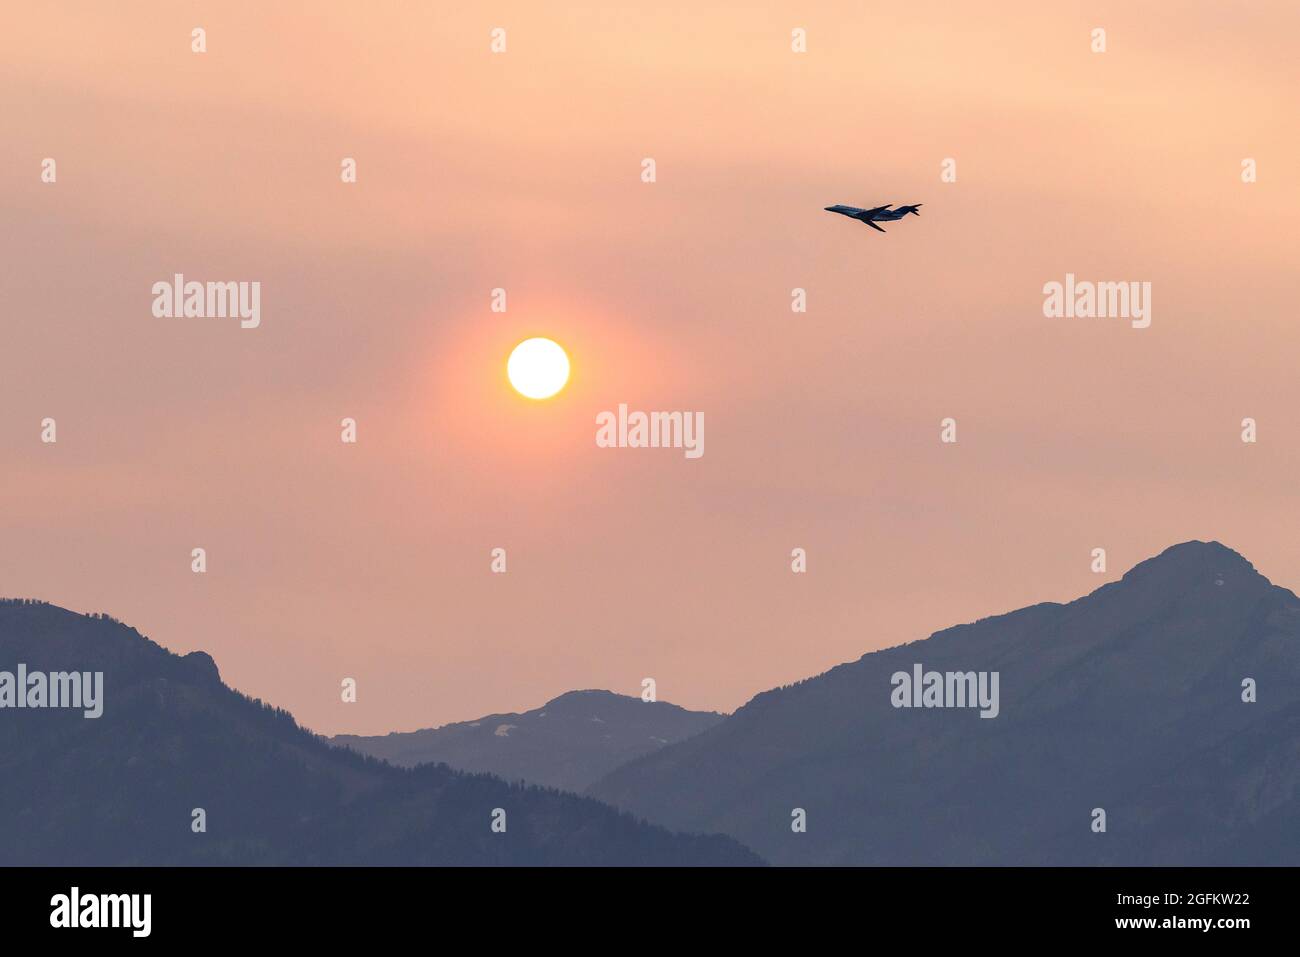 California wildfire smoke and a jet at dusk in Jackson, WY. Stock Photo